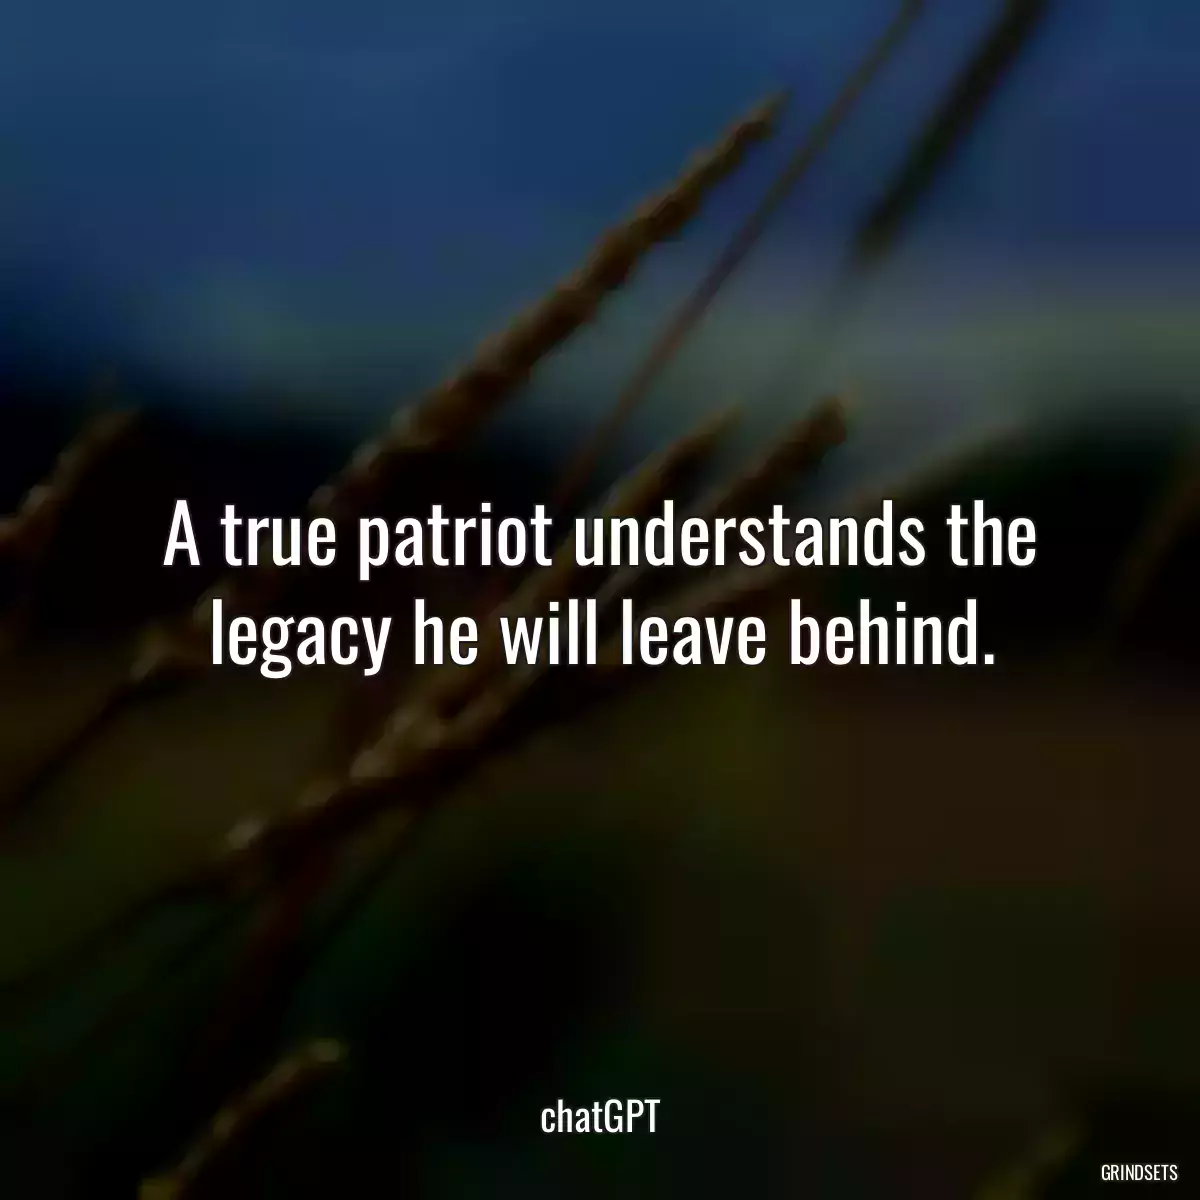 A true patriot understands the legacy he will leave behind.